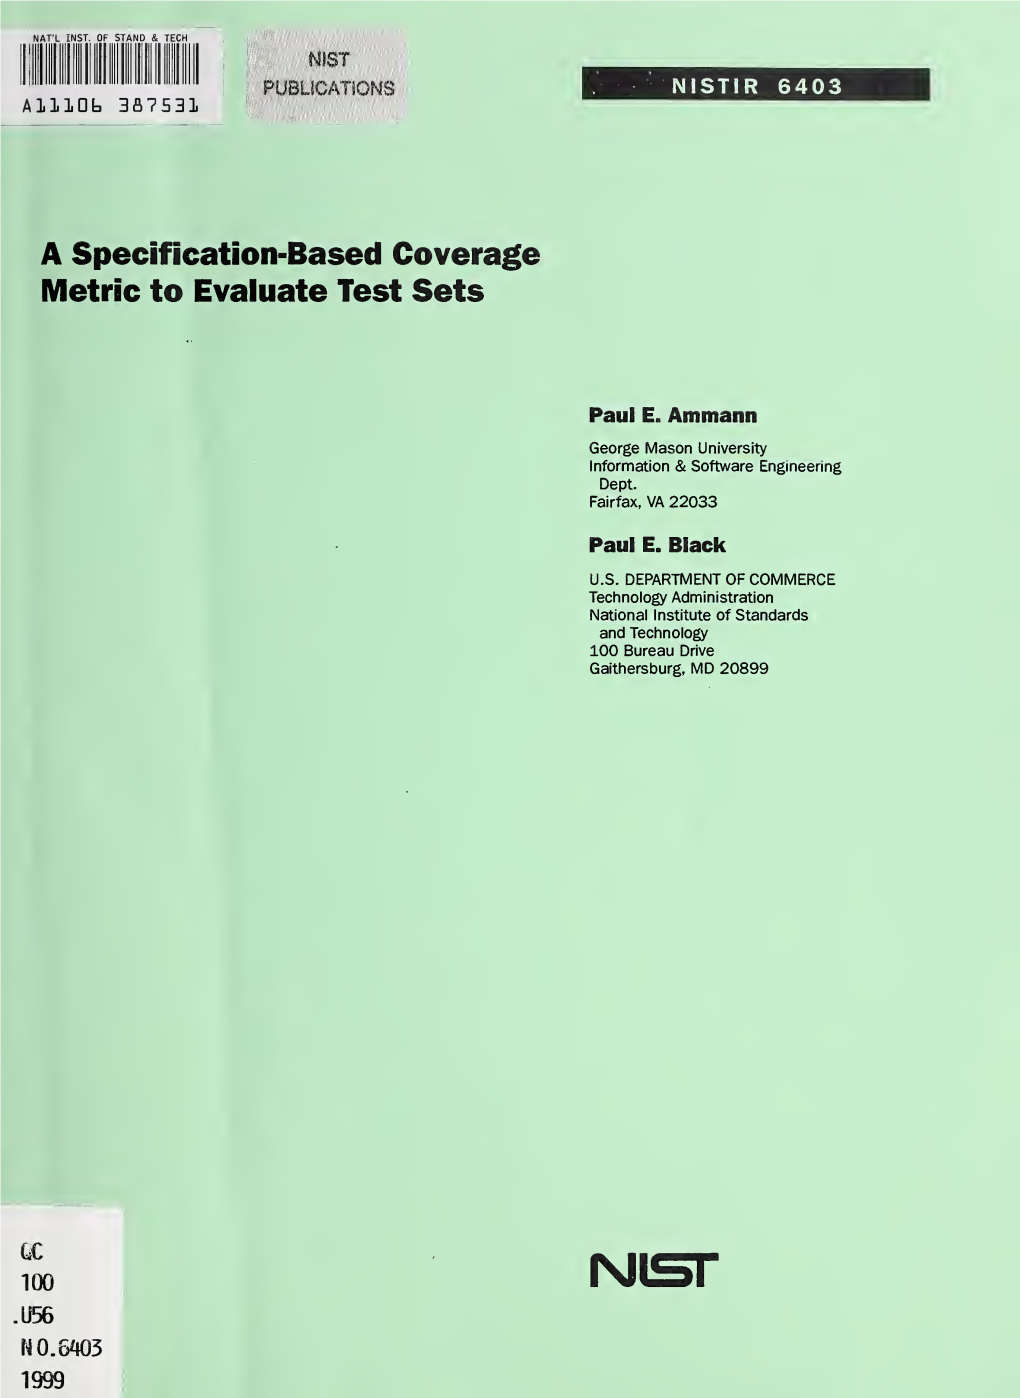 A Specification-Based Coverage Metric to Evaluate Test Sets